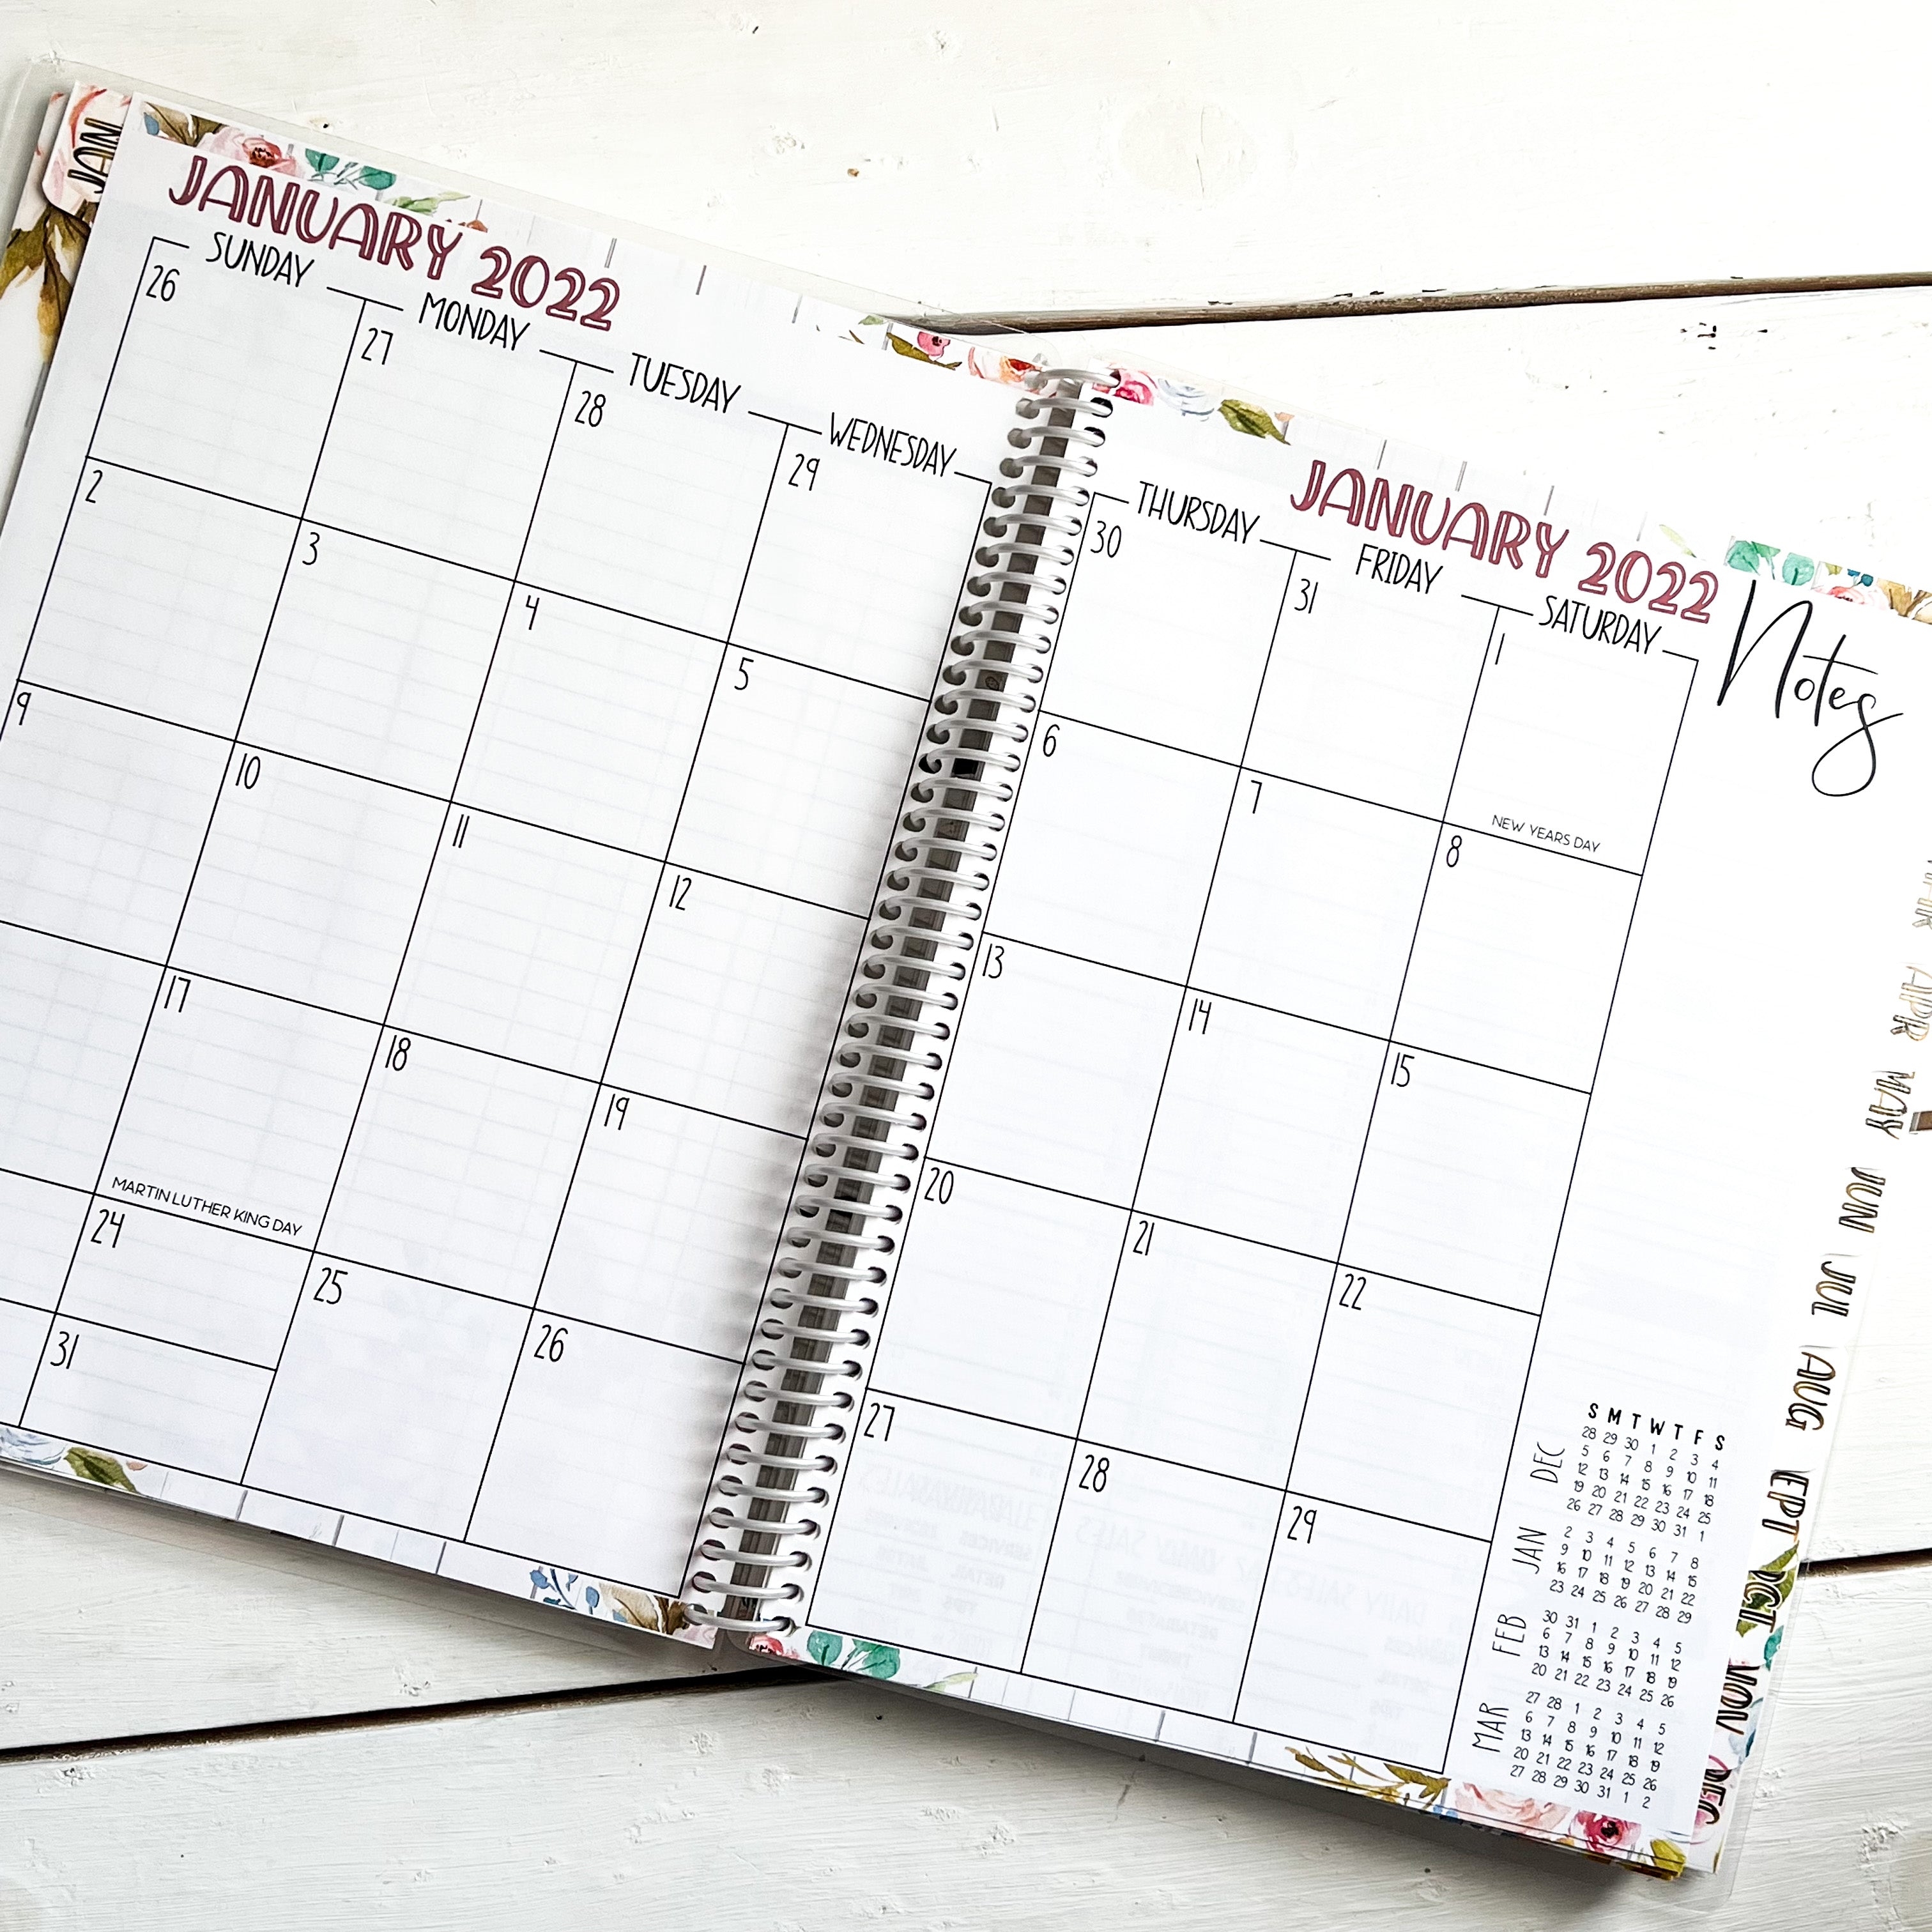 Sales Tracker Appointment Book -  BUFFALO PLAID